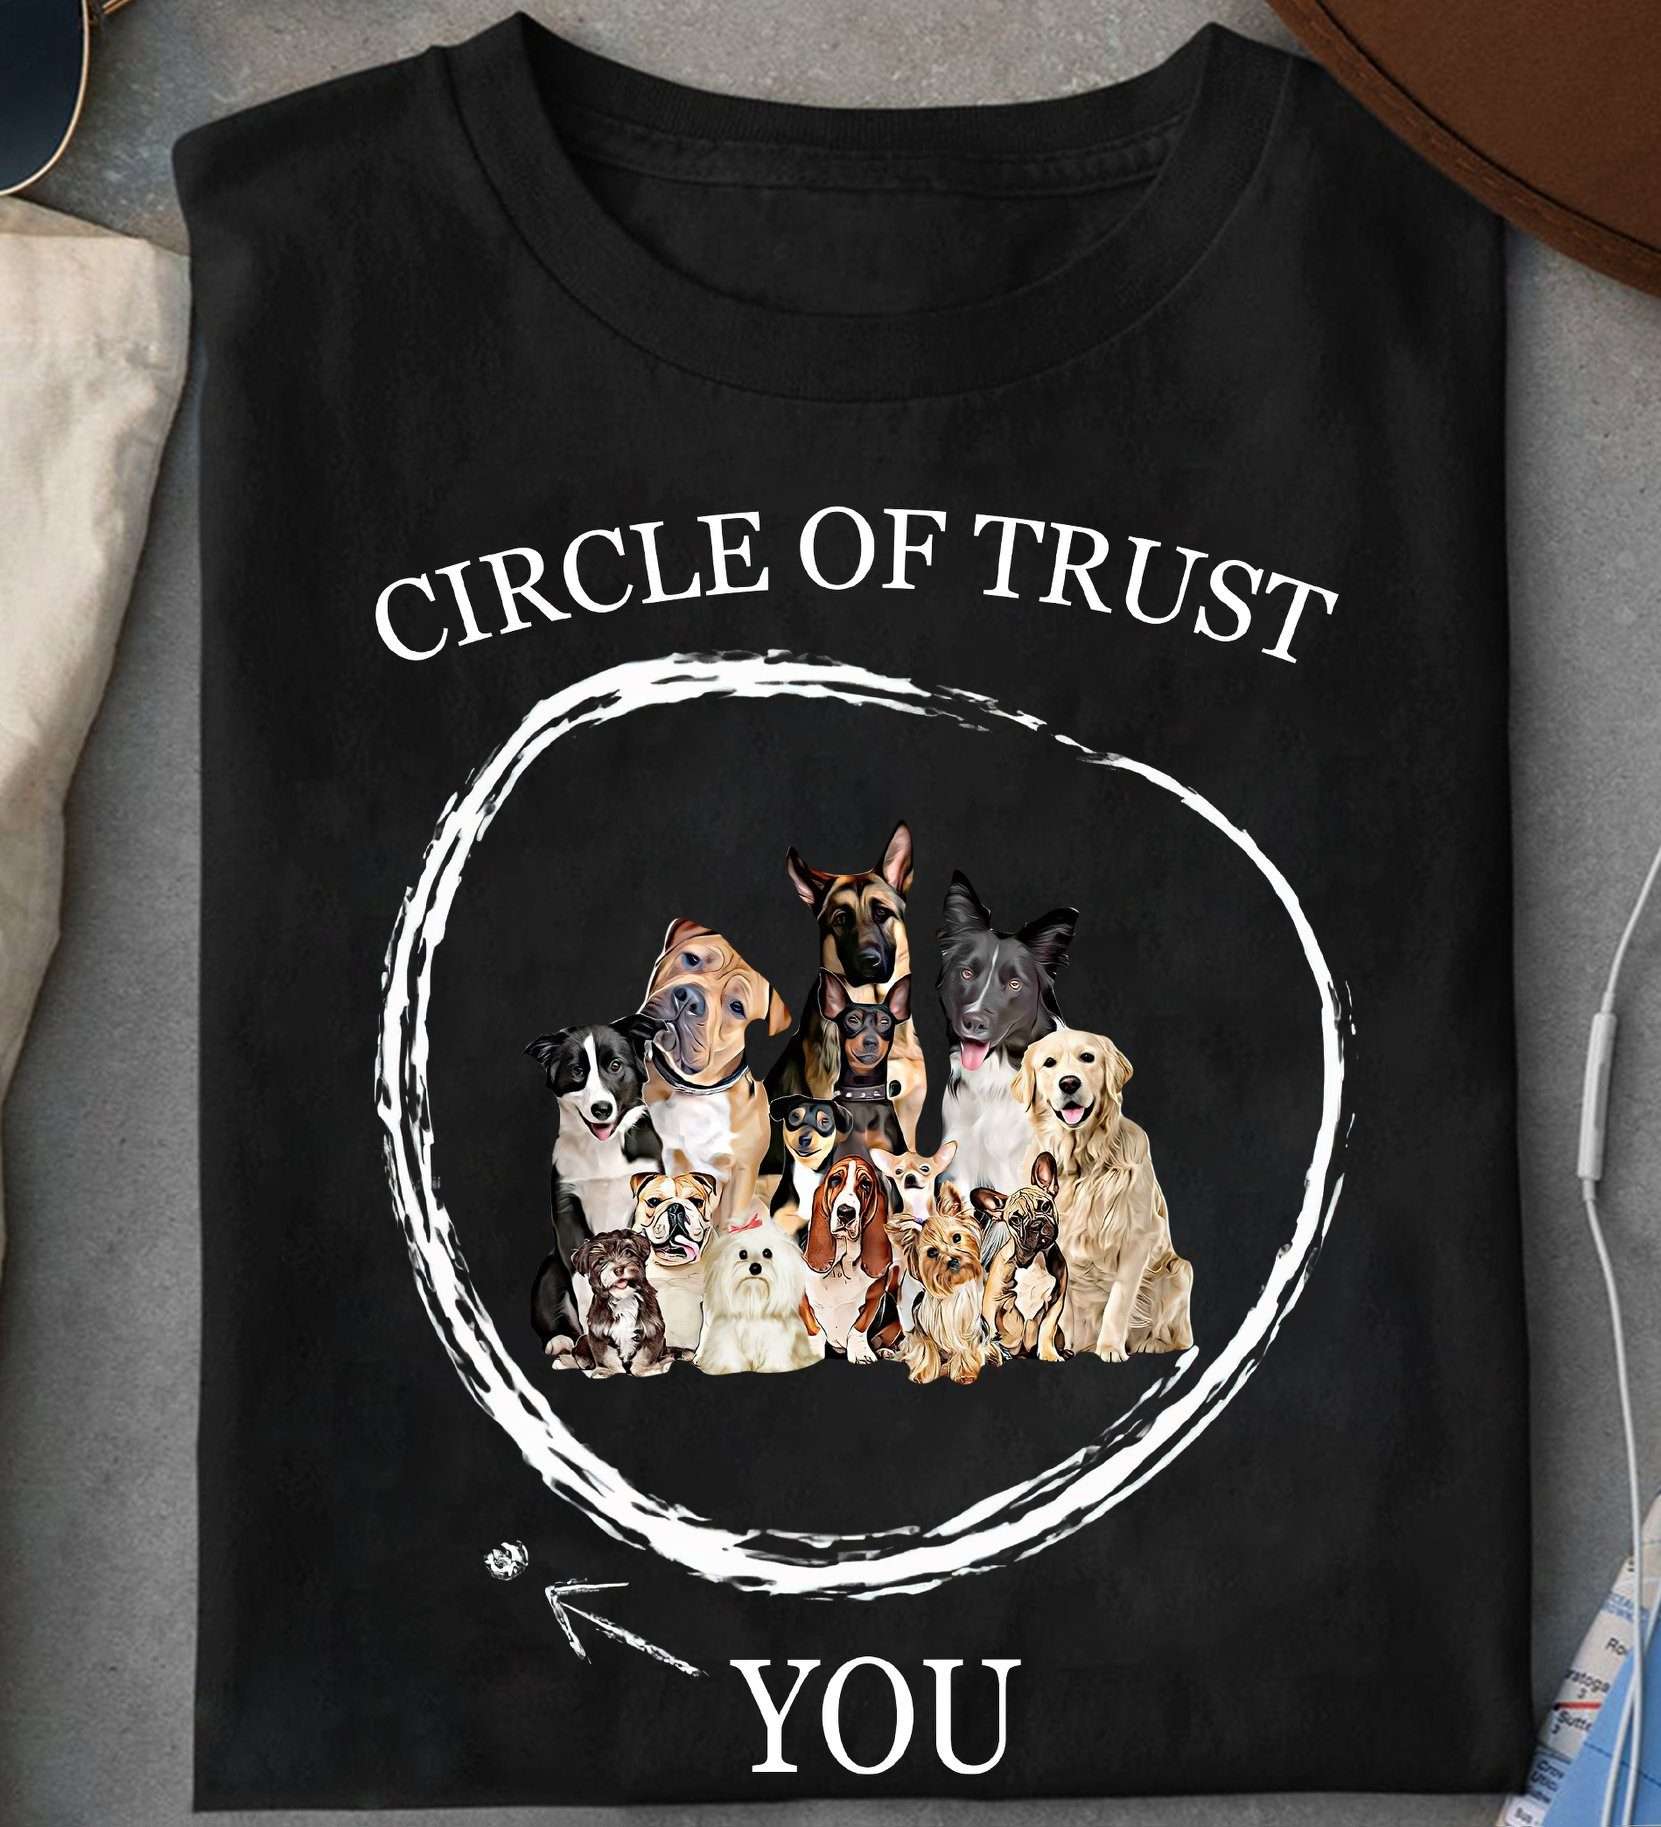 Circle of trust - Dog the loyal animal, T-shirt for dog lover